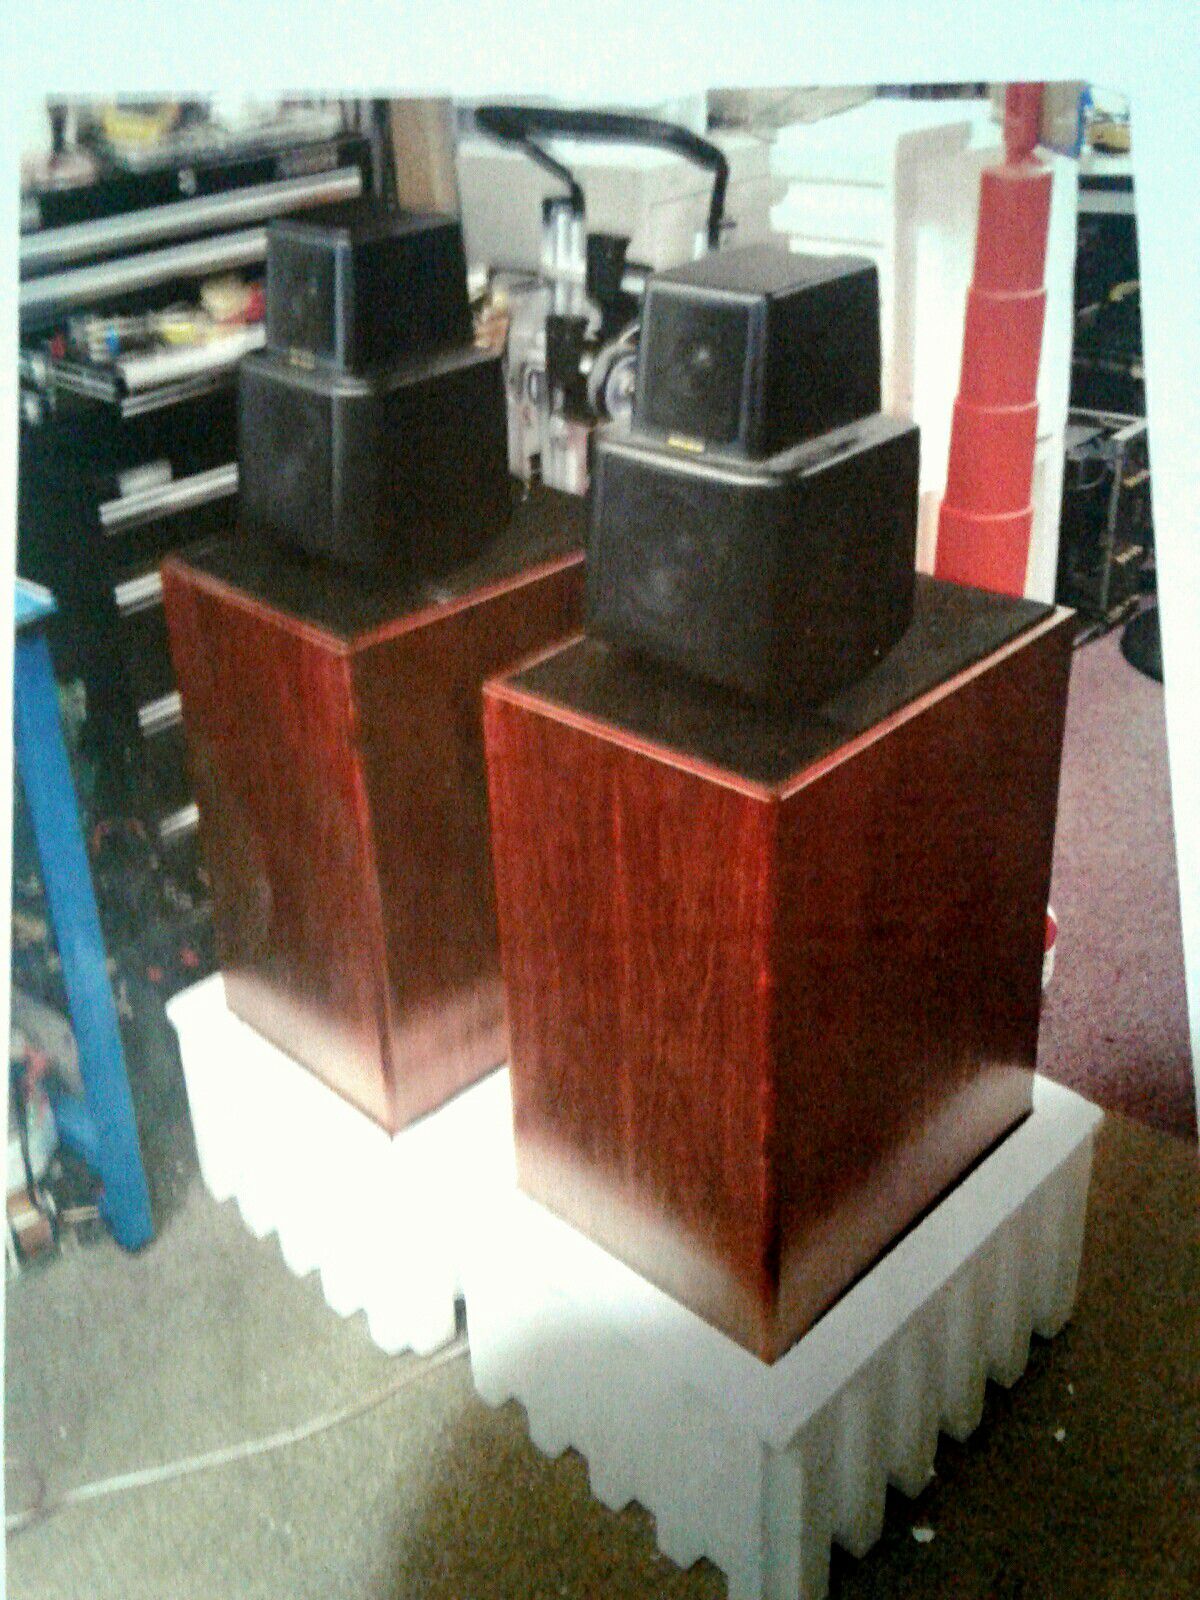 Attn serious audiophiles Pair of vintage (70's) KEF REFERENCE SERIES SPEAKERS MODEL 102.7 Mint condition. Incl.enclosures and KUBE.